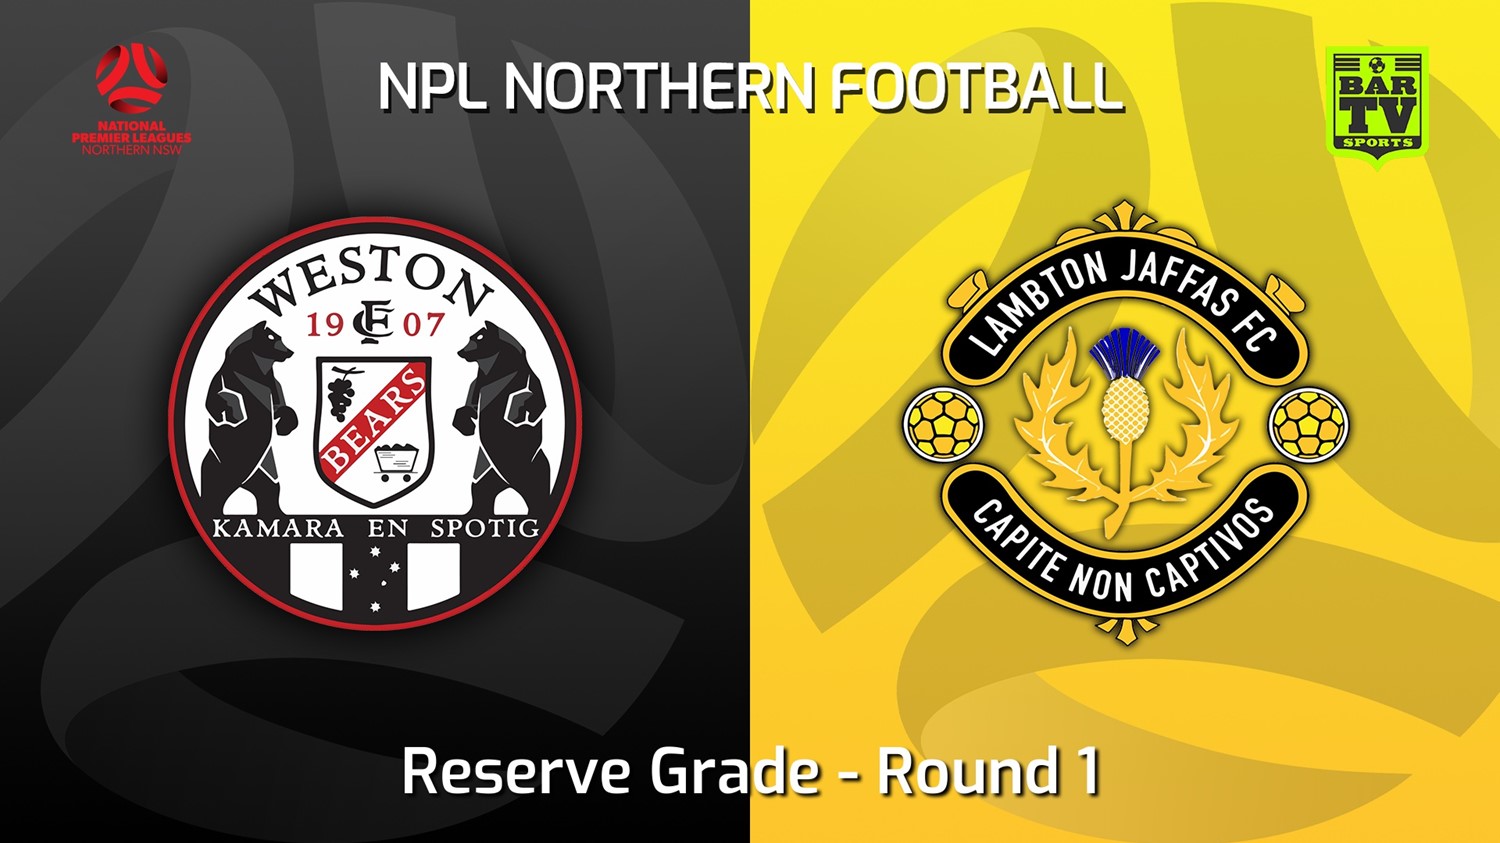 220415-NNSW NPLM Res Round 1 - Weston Workers FC Res v Lambton Jaffas FC Res Minigame Slate Image